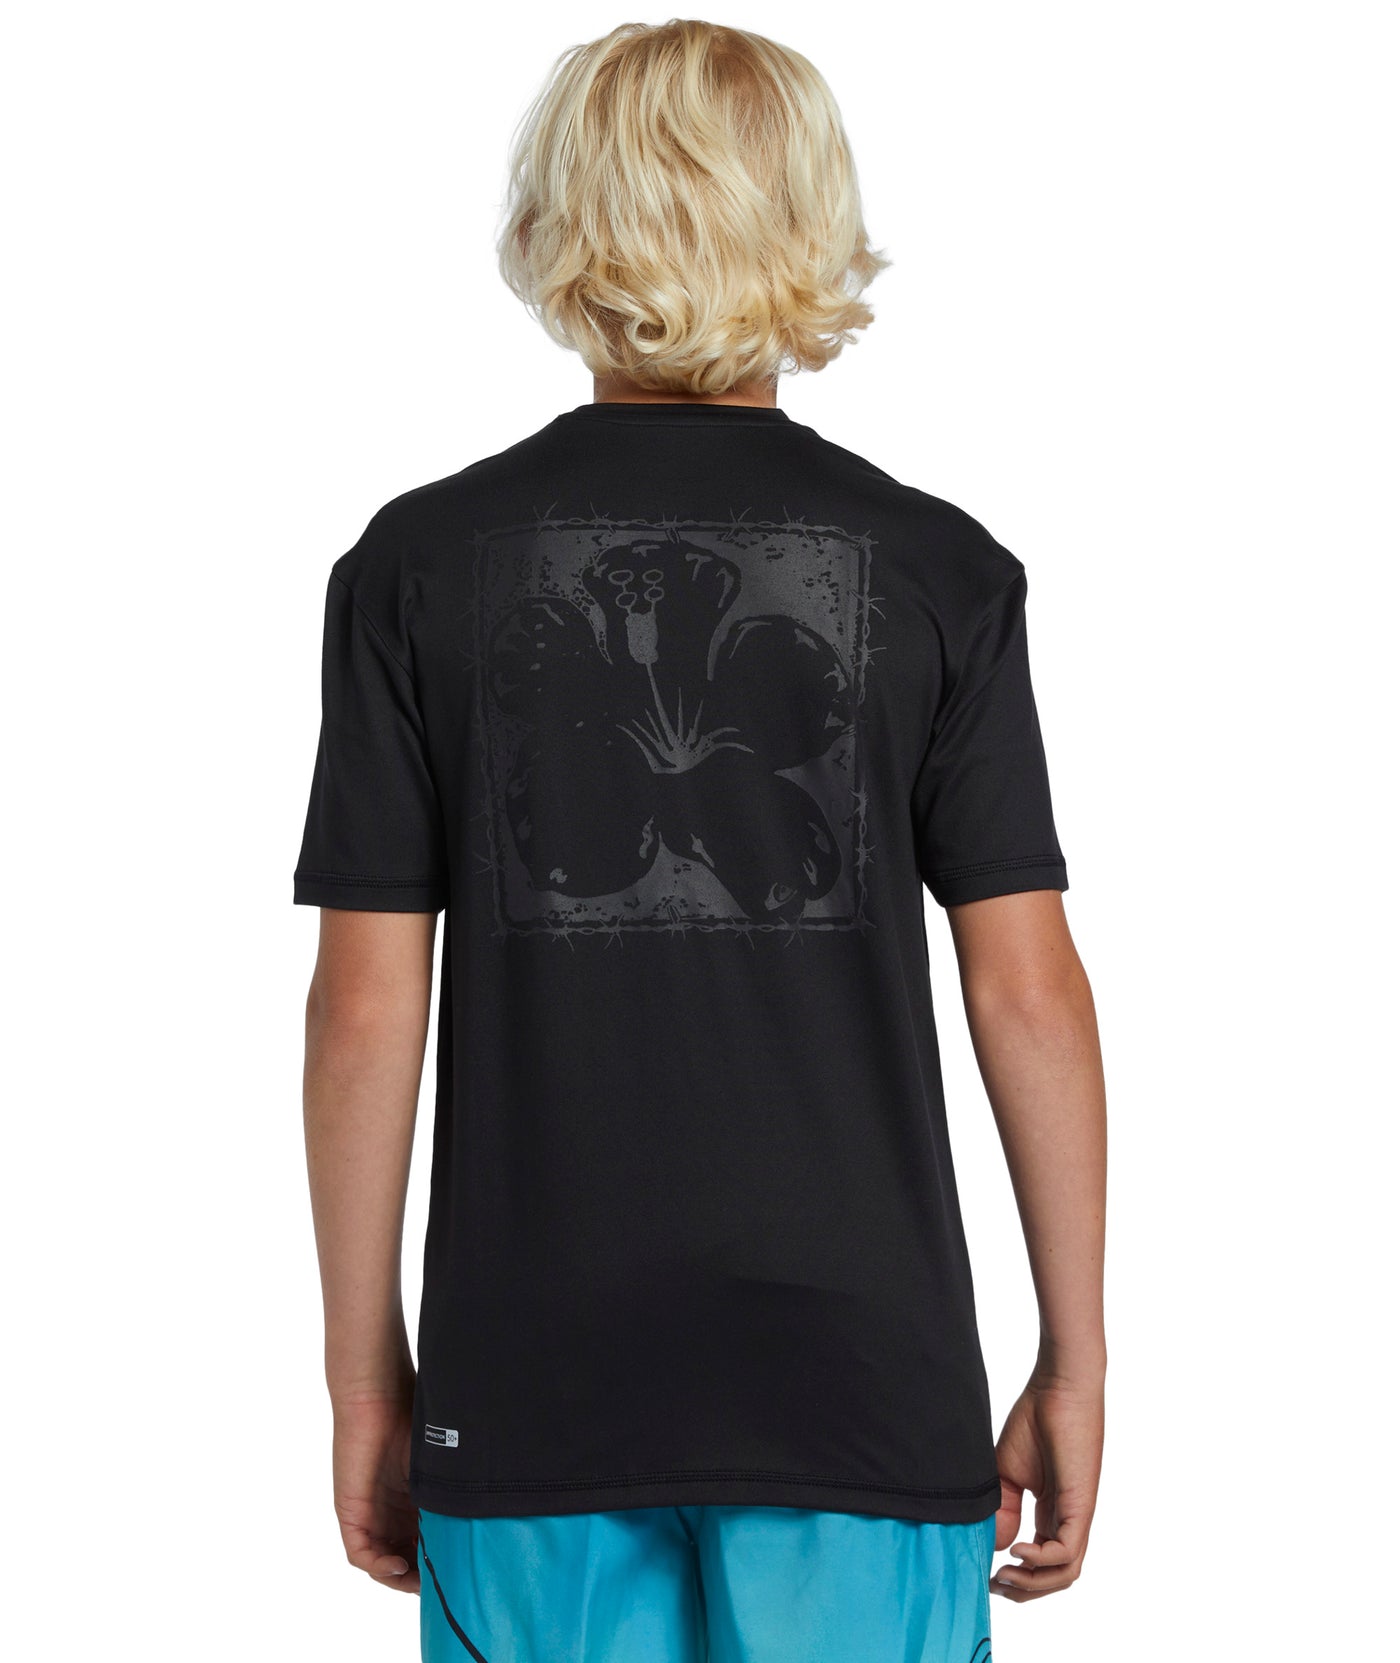 Quiksilver Radical Surf Tee Youth SS